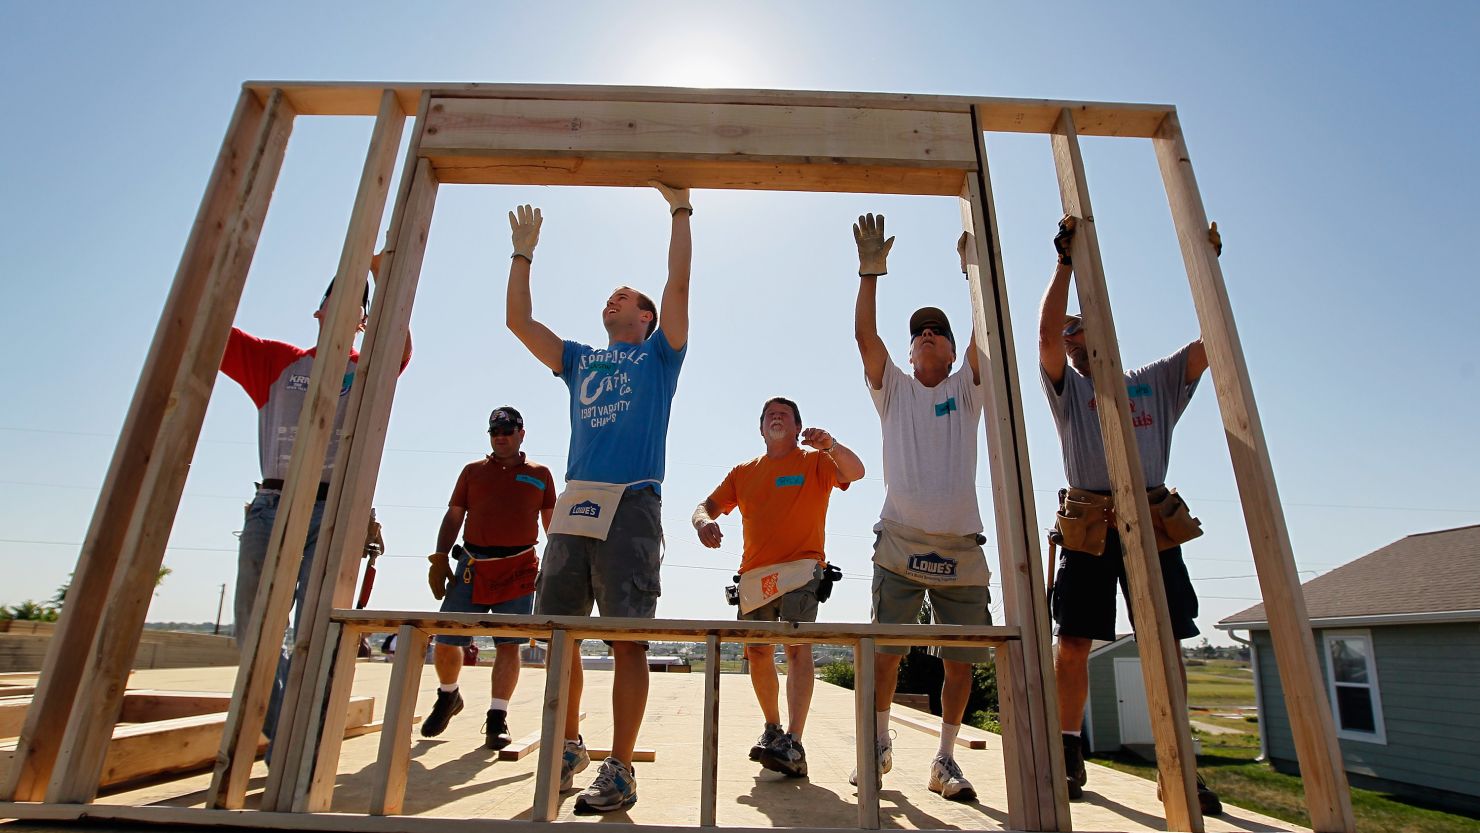 There are almost 1.5 million nonprofit organizations in the country, including Habitat for Humanity.  